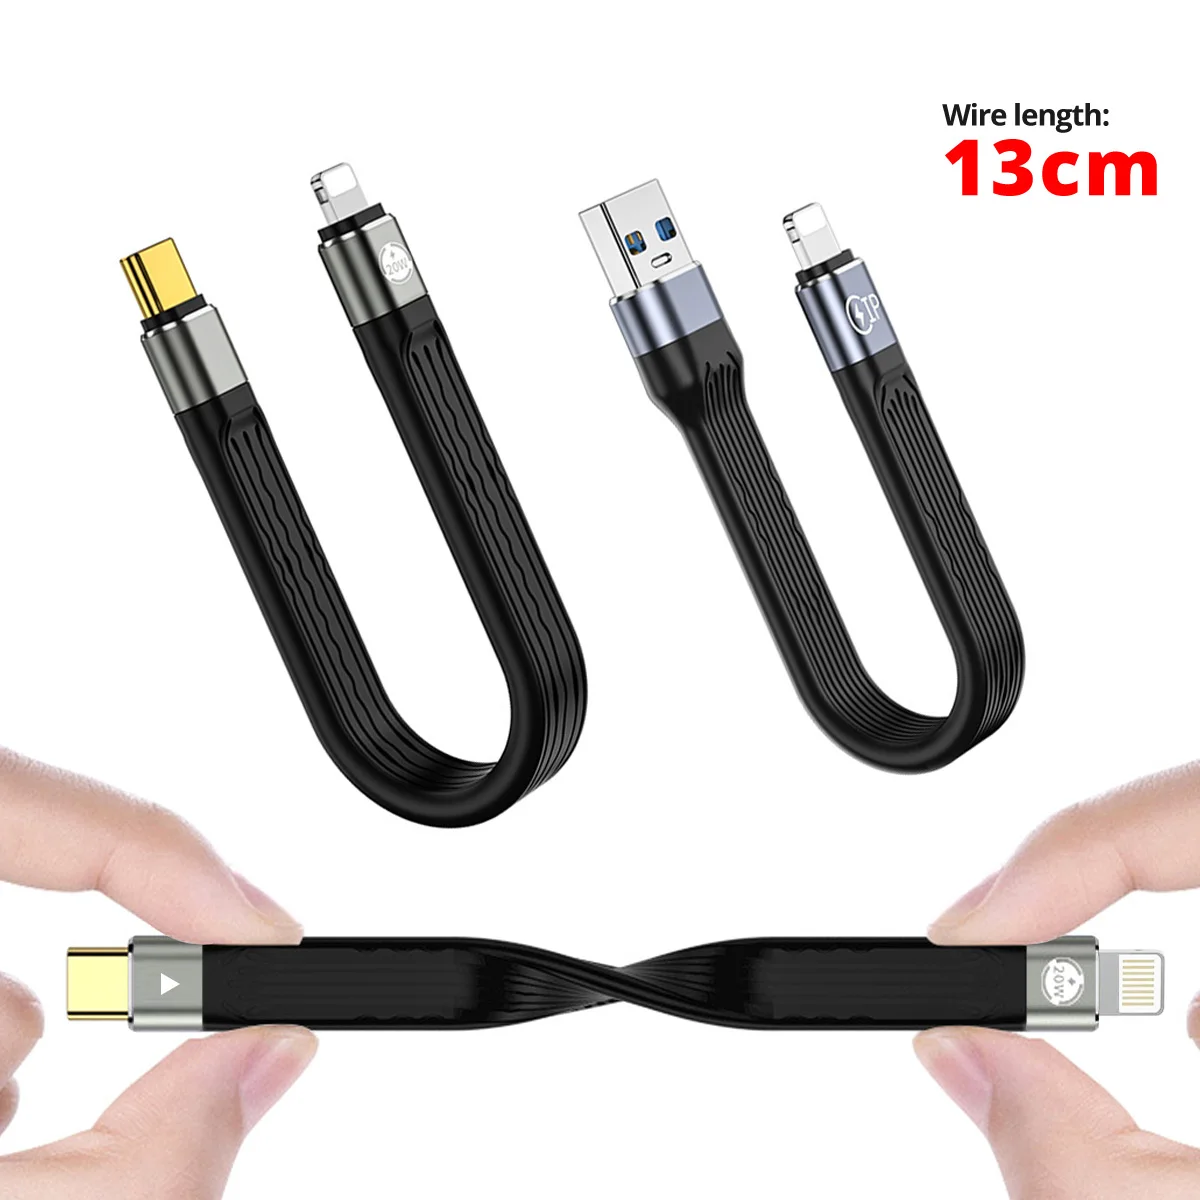 

PD 20W Short USB C Cable for iPhone 13 14 Pro Max Soft FPC 3A Fast Charging USB C Cable for iPhone 12 Mini USB Type C Data Cabel